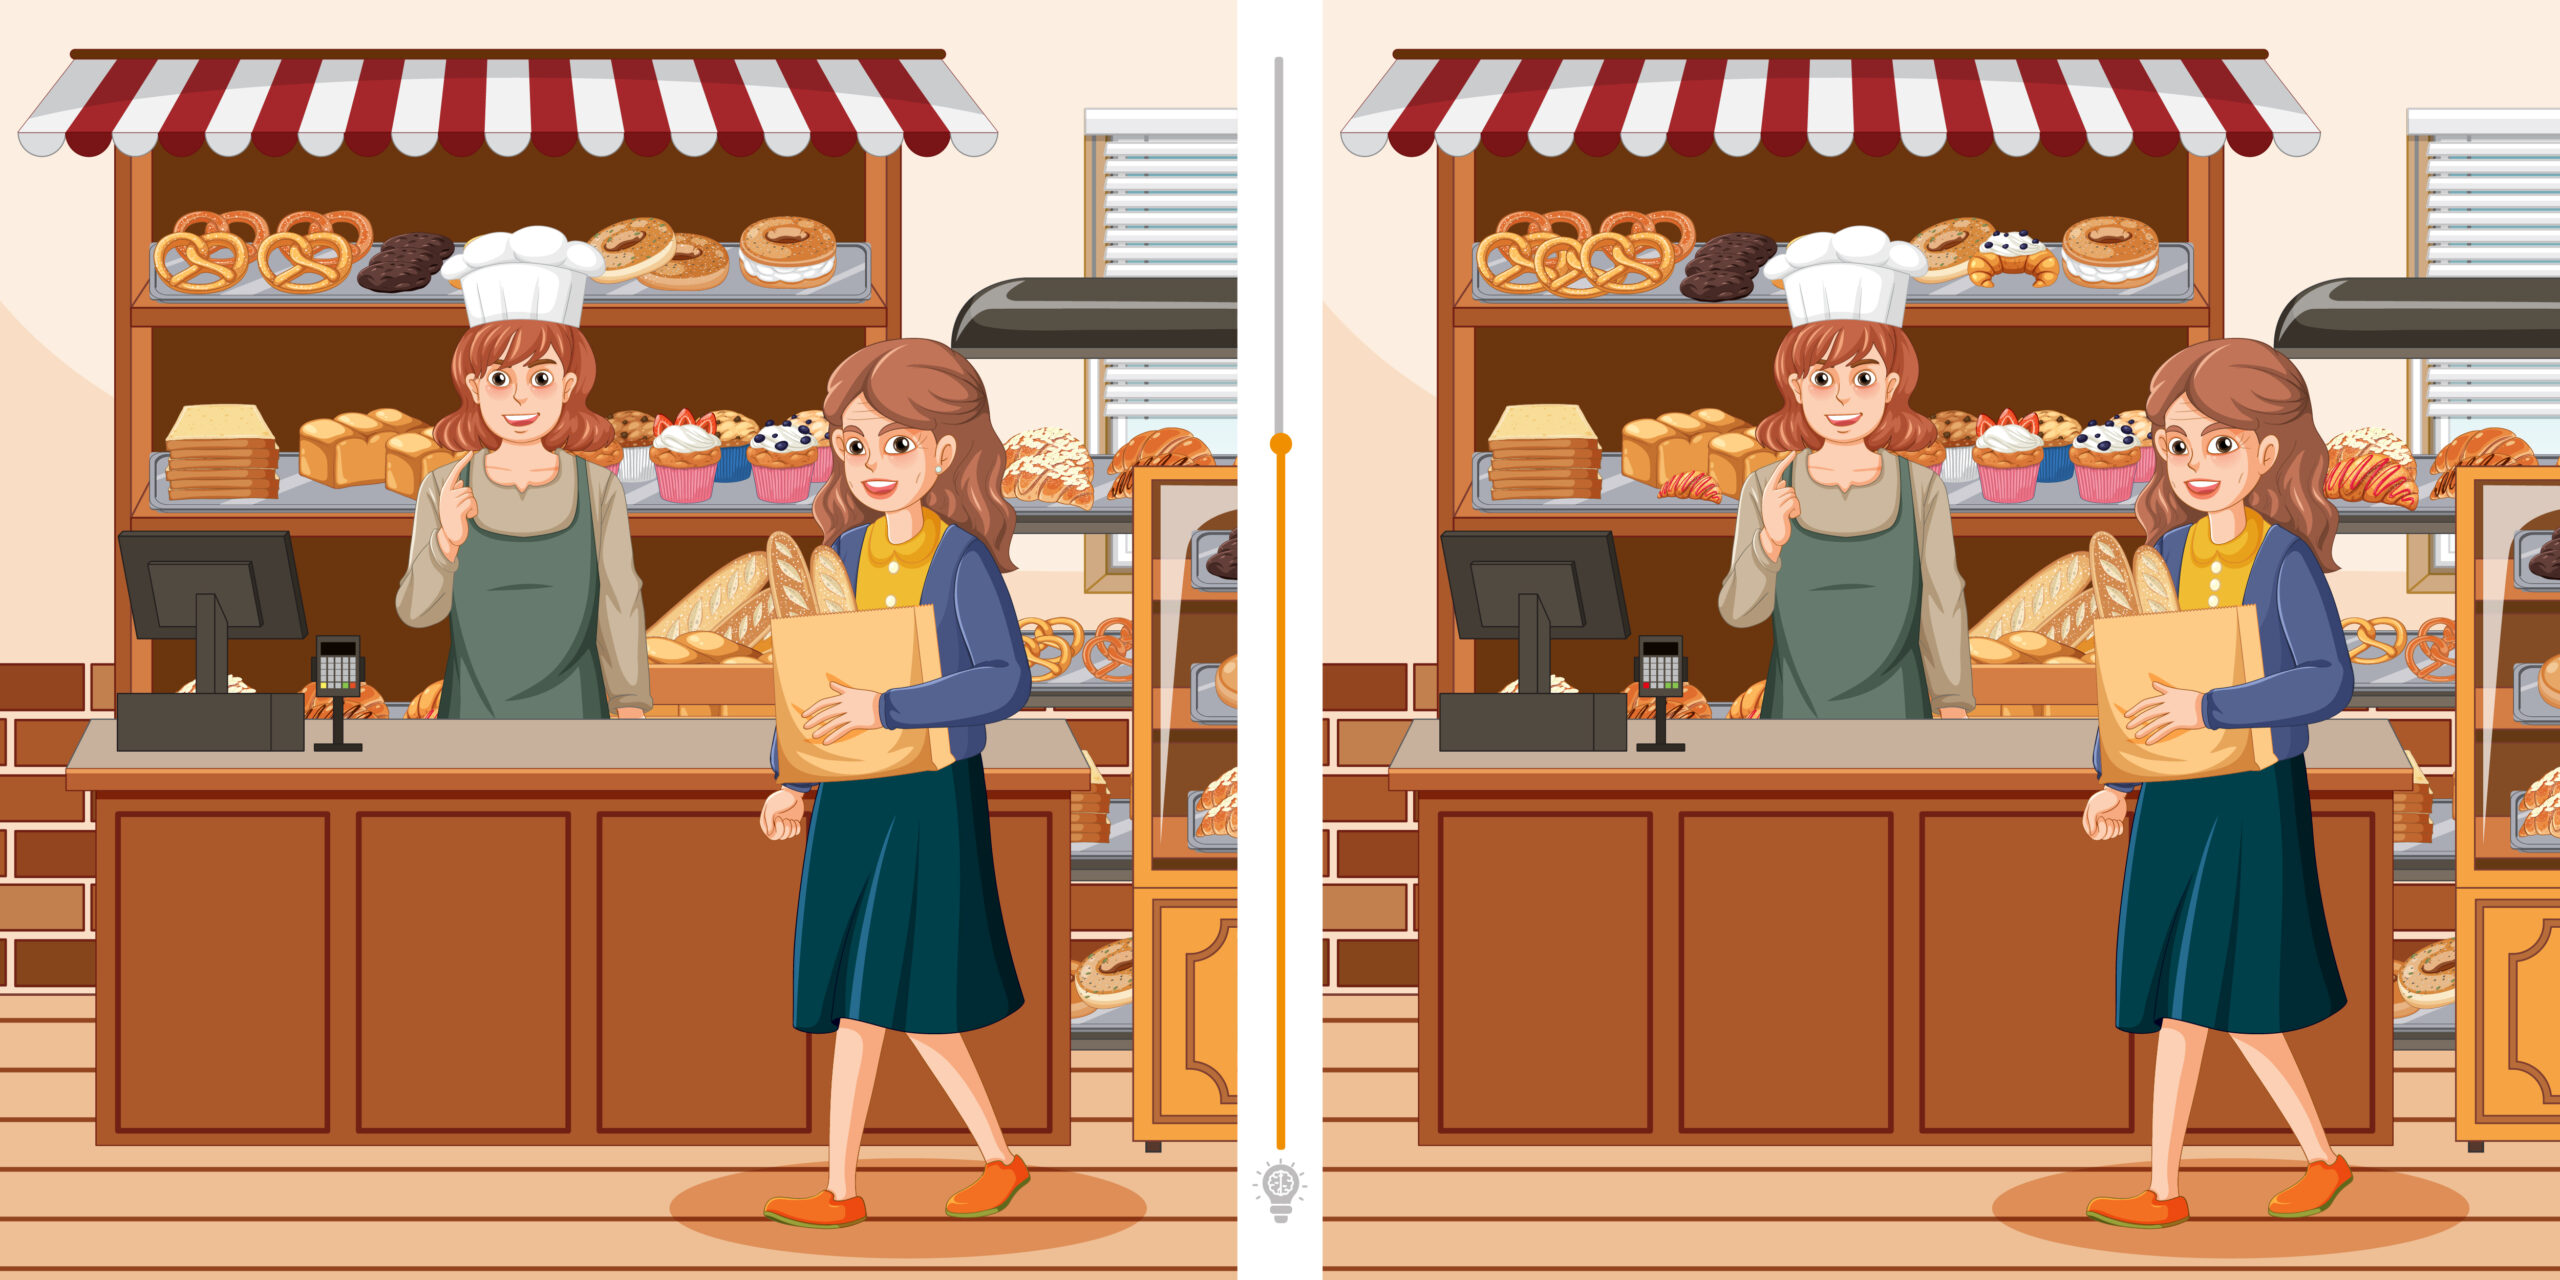 Visual challenge: Discover the 10 differences between these 2 images and complete the challenge in under 40 seconds!